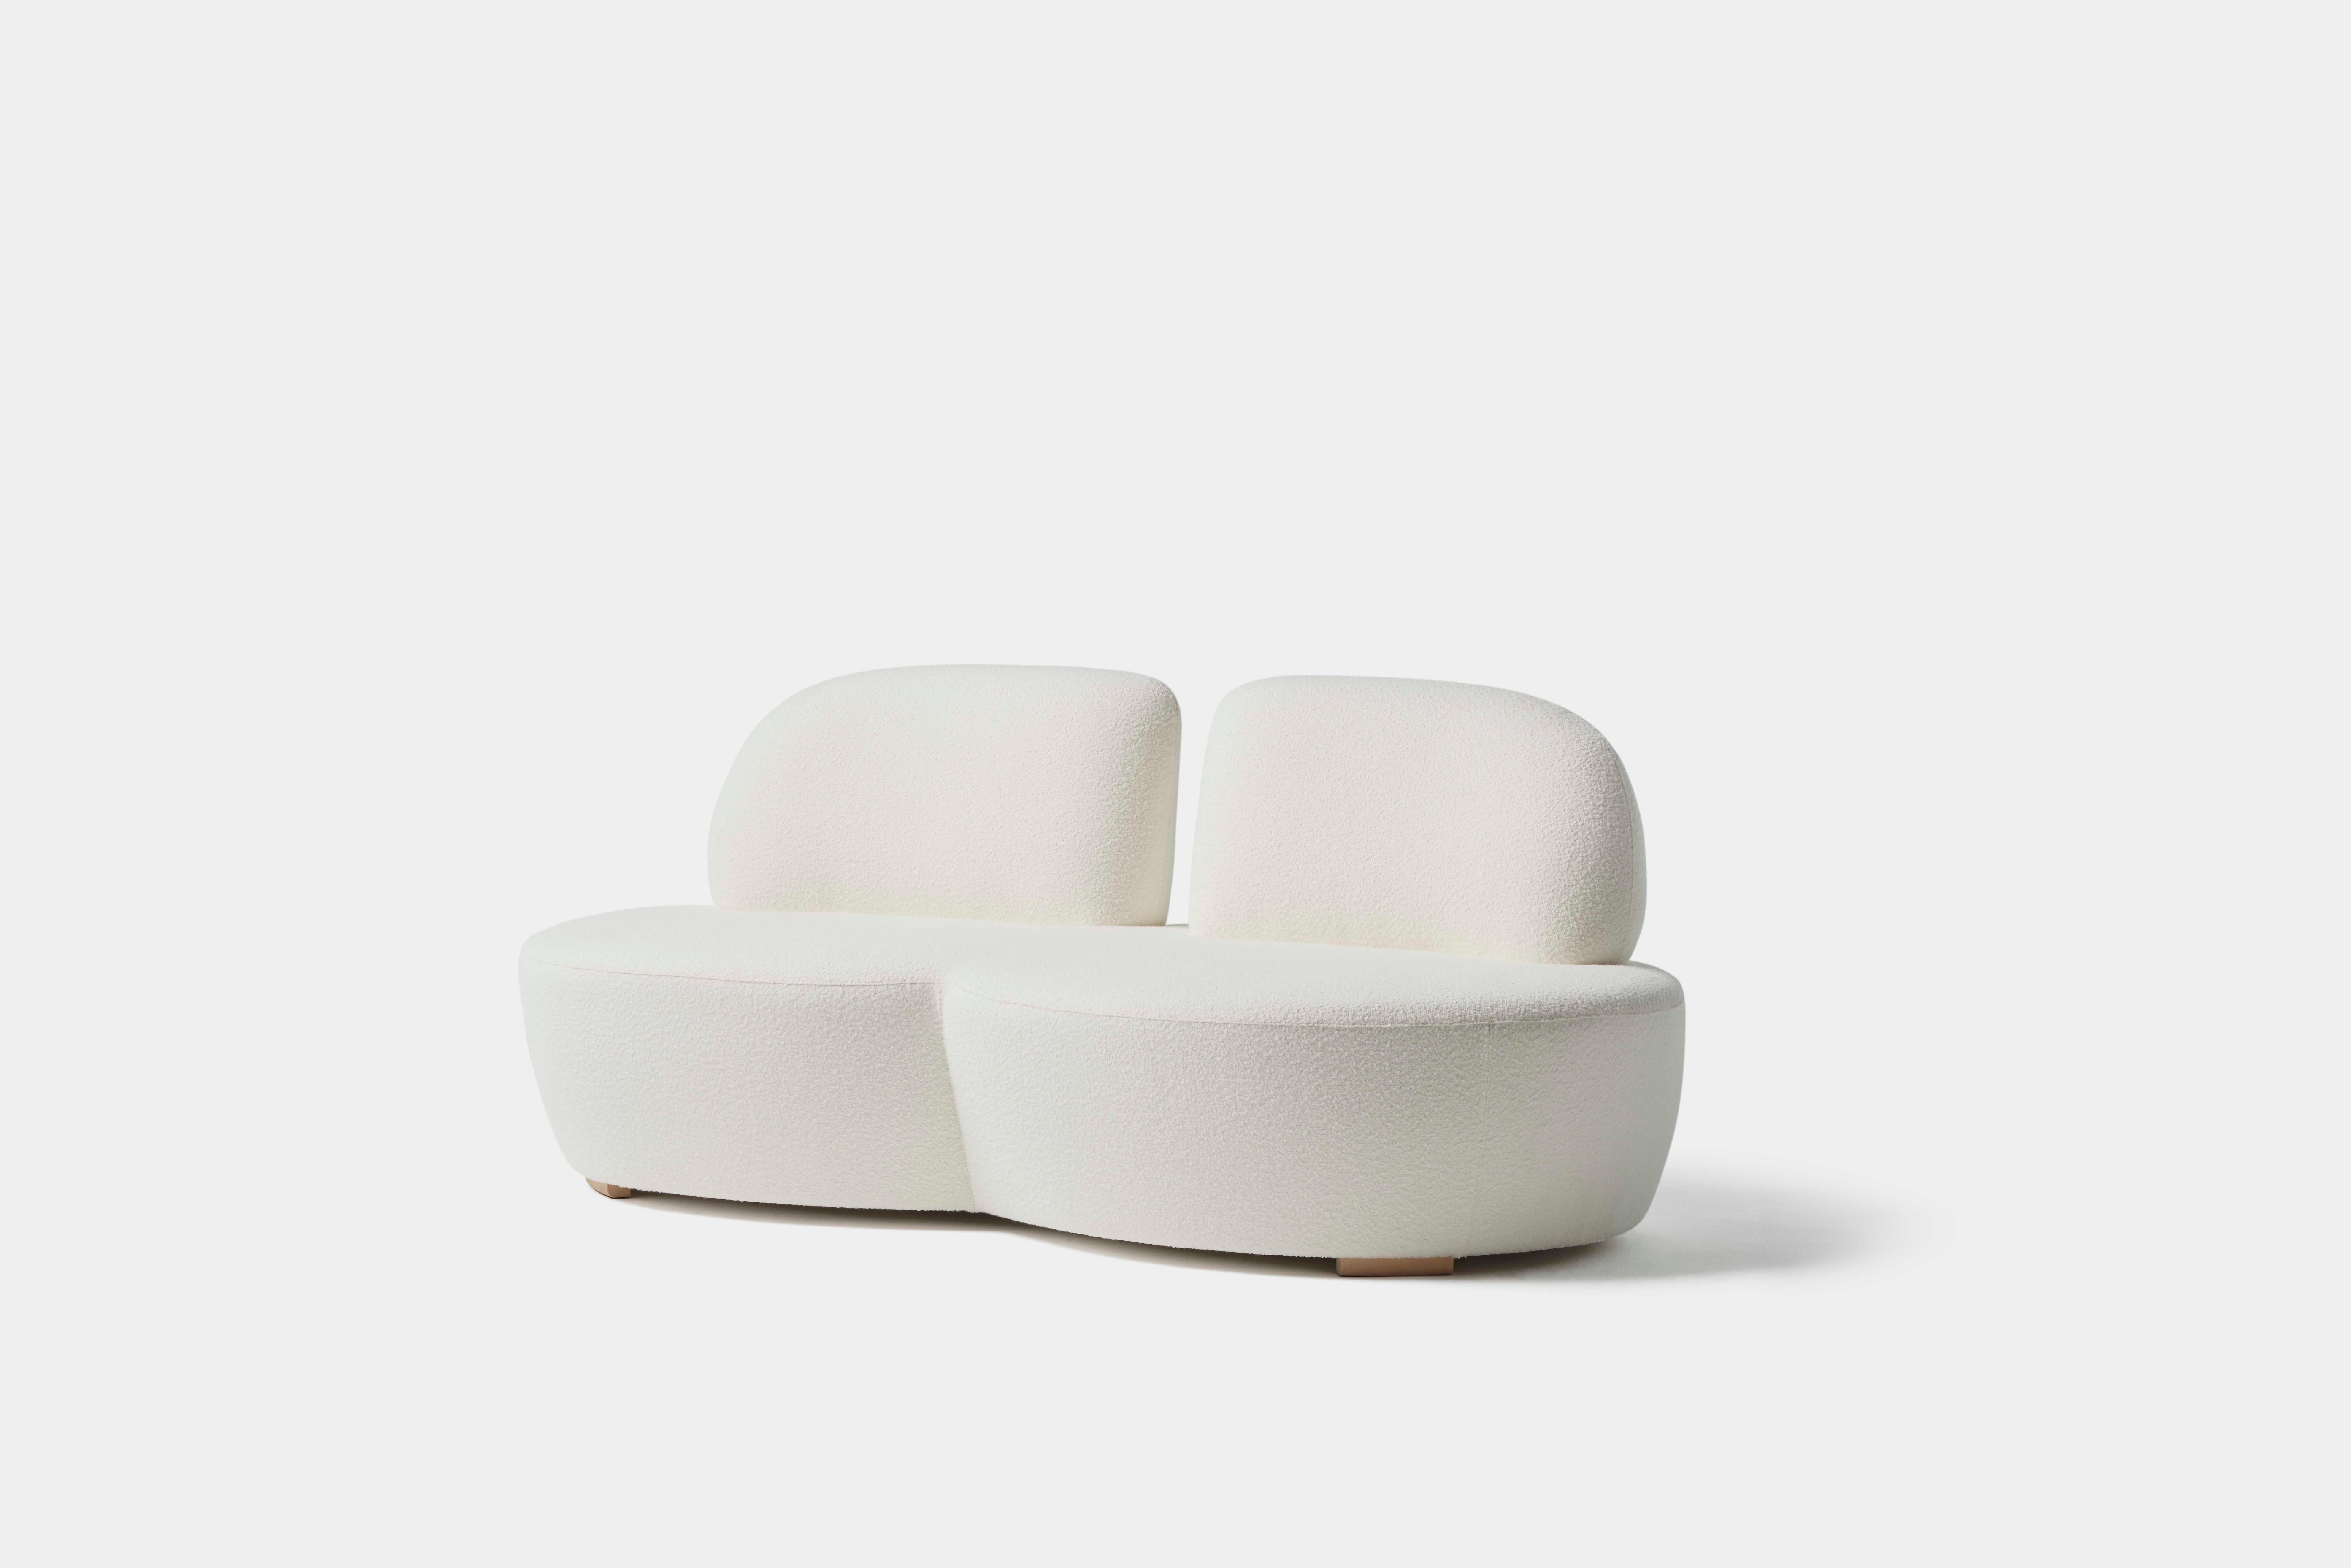 Twin moon sofa by Pepe Albargues
Dimensions: W 194 x D 95 x H 83 x Seat 40
Materials: Pine wood, plywood and tablex structure. Foam CMHR (high resilience and flame retardant) for all our cushion filling systems. Lacquered beech wood